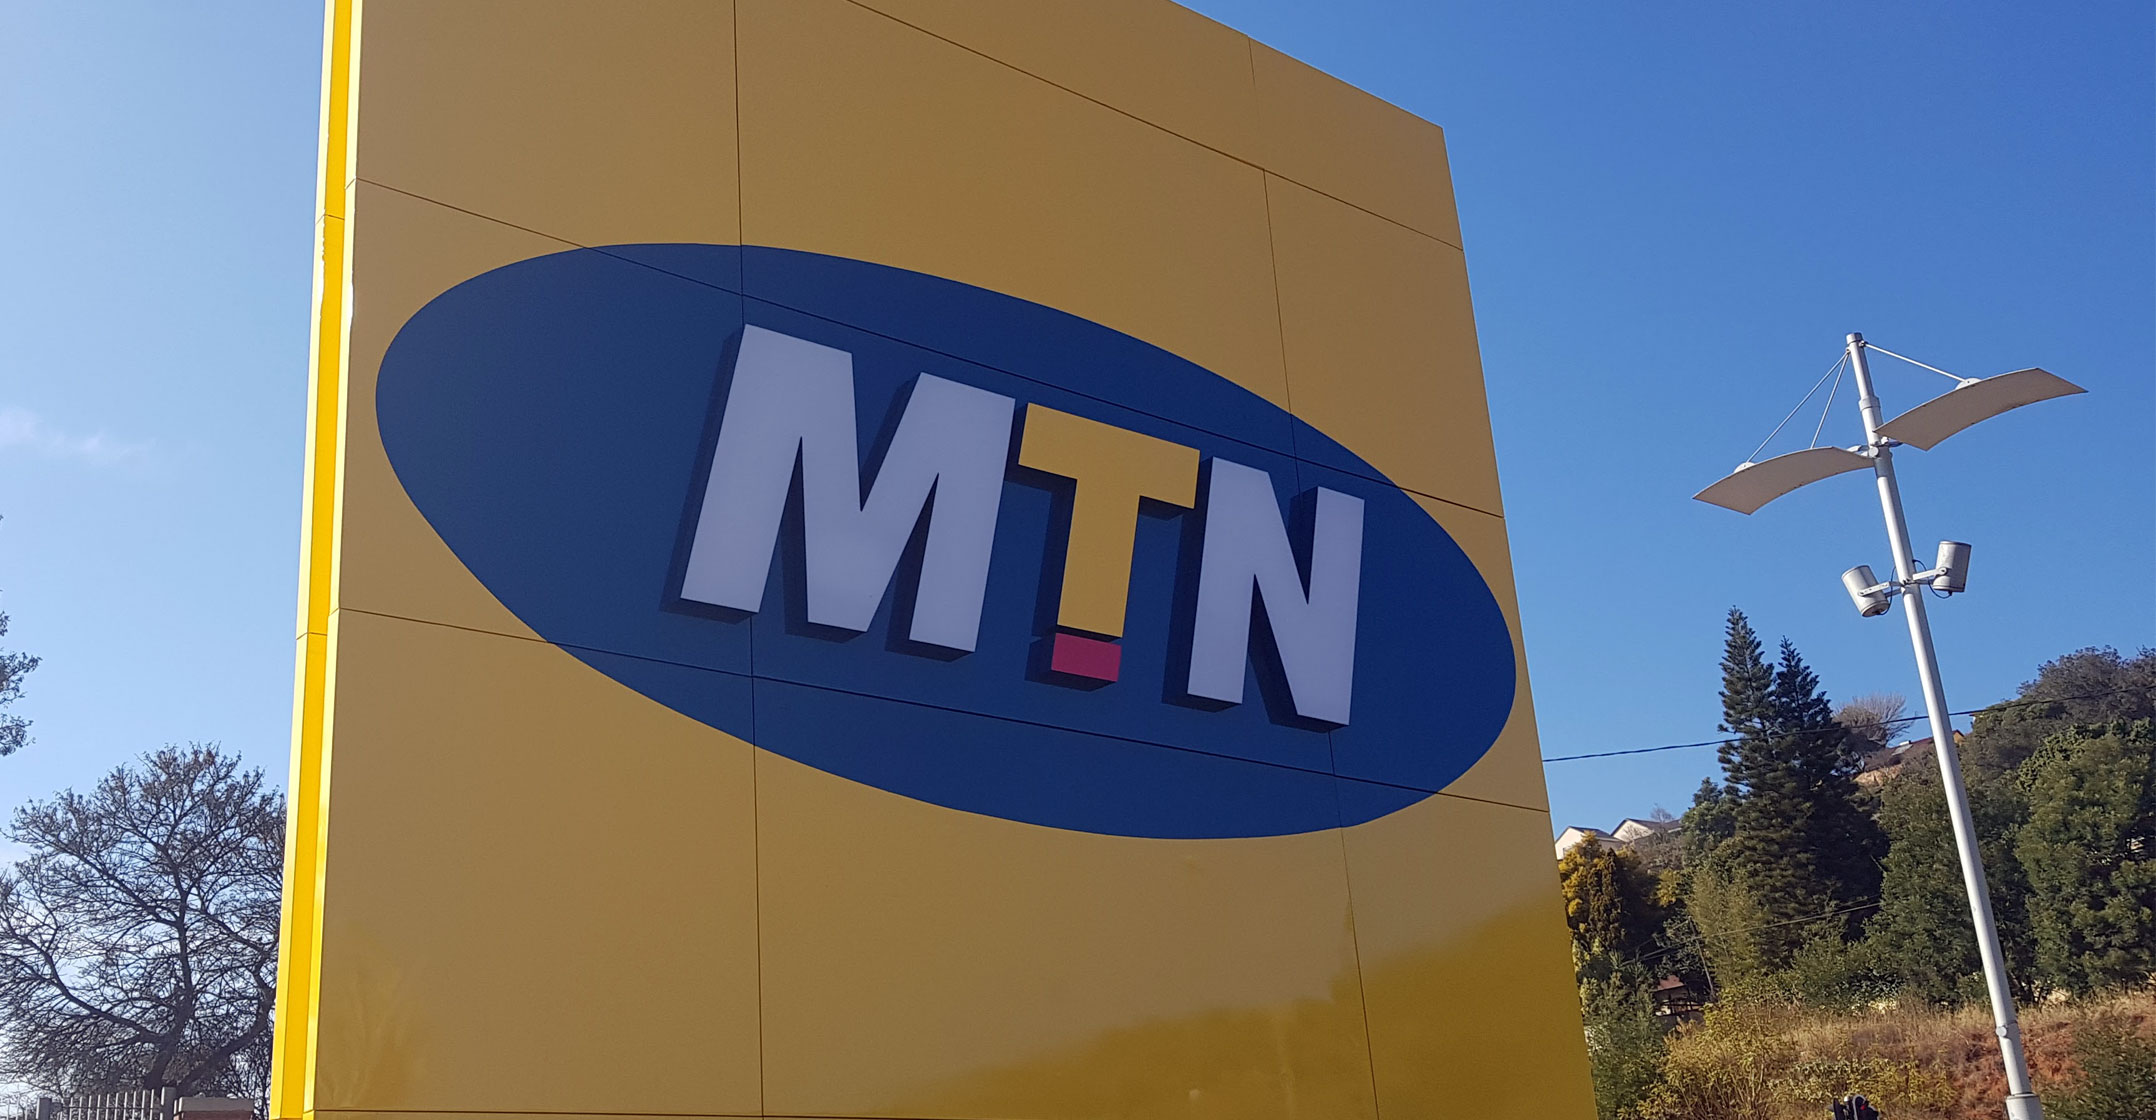 MTN Named Most Admired Telecom Brand in Africa